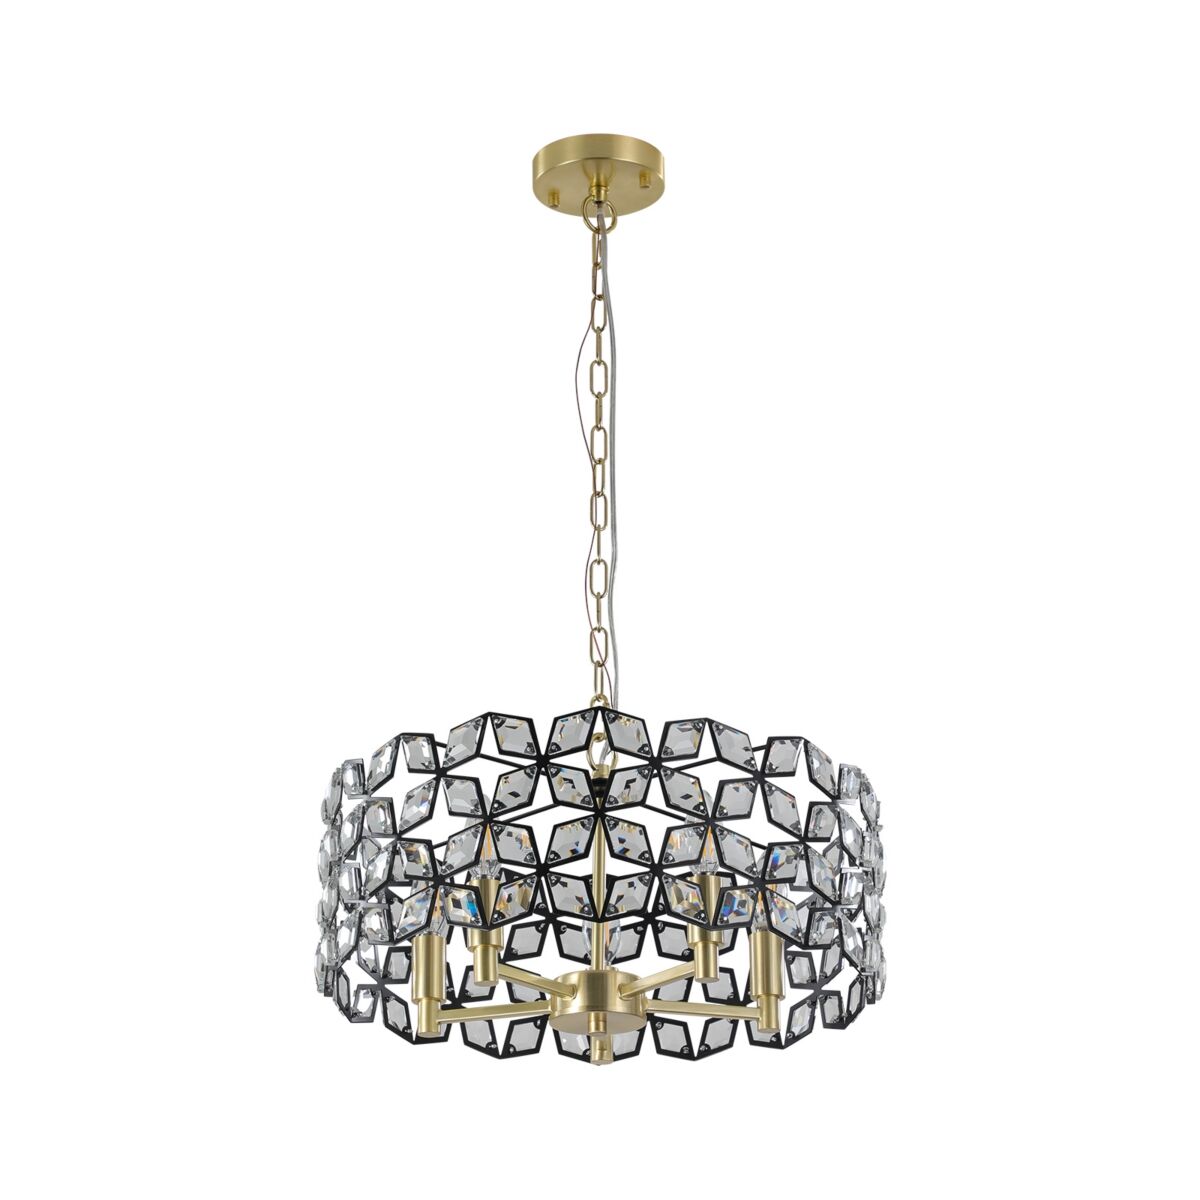 Simplie Fun Modern Crystal Chandelier for Living-Room Round Cristal Lamp Luxury Home Decor Light Fixture - Gold